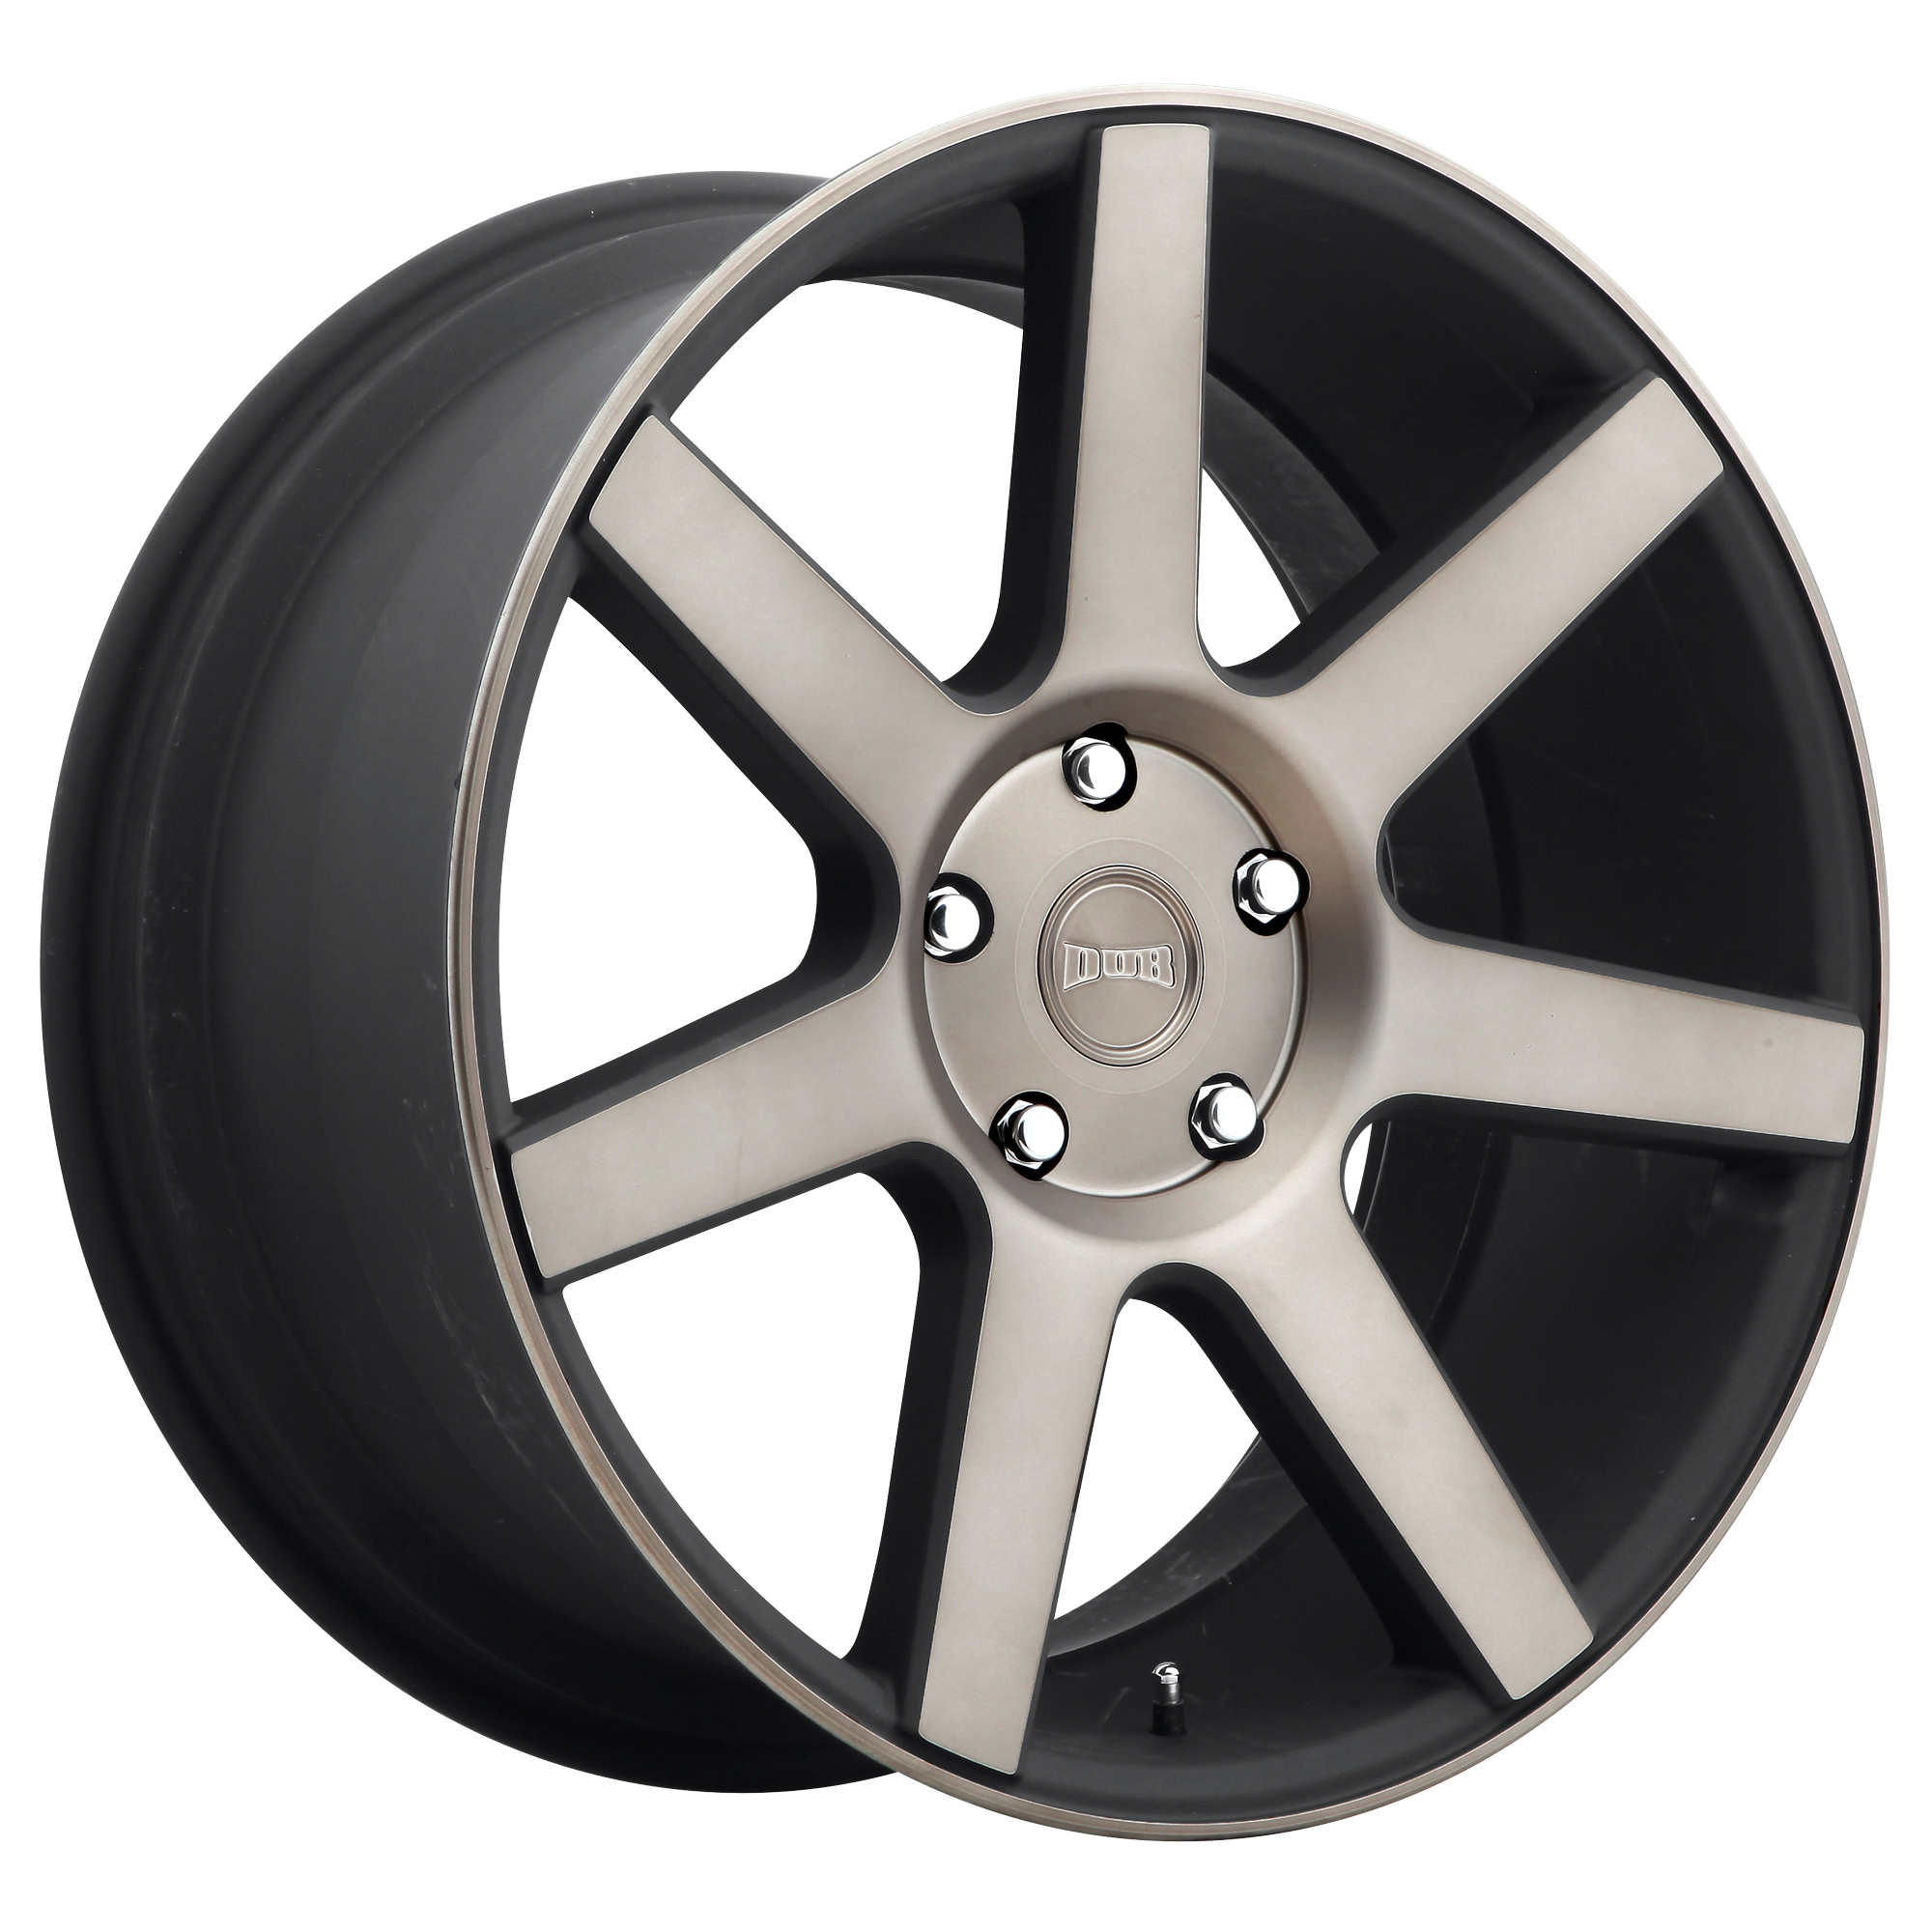 FUTURE 22x9.5 6x139.70 MATTE BLACK DOUBLE DARK TINT (19 mm) - Tires and Engine Performance